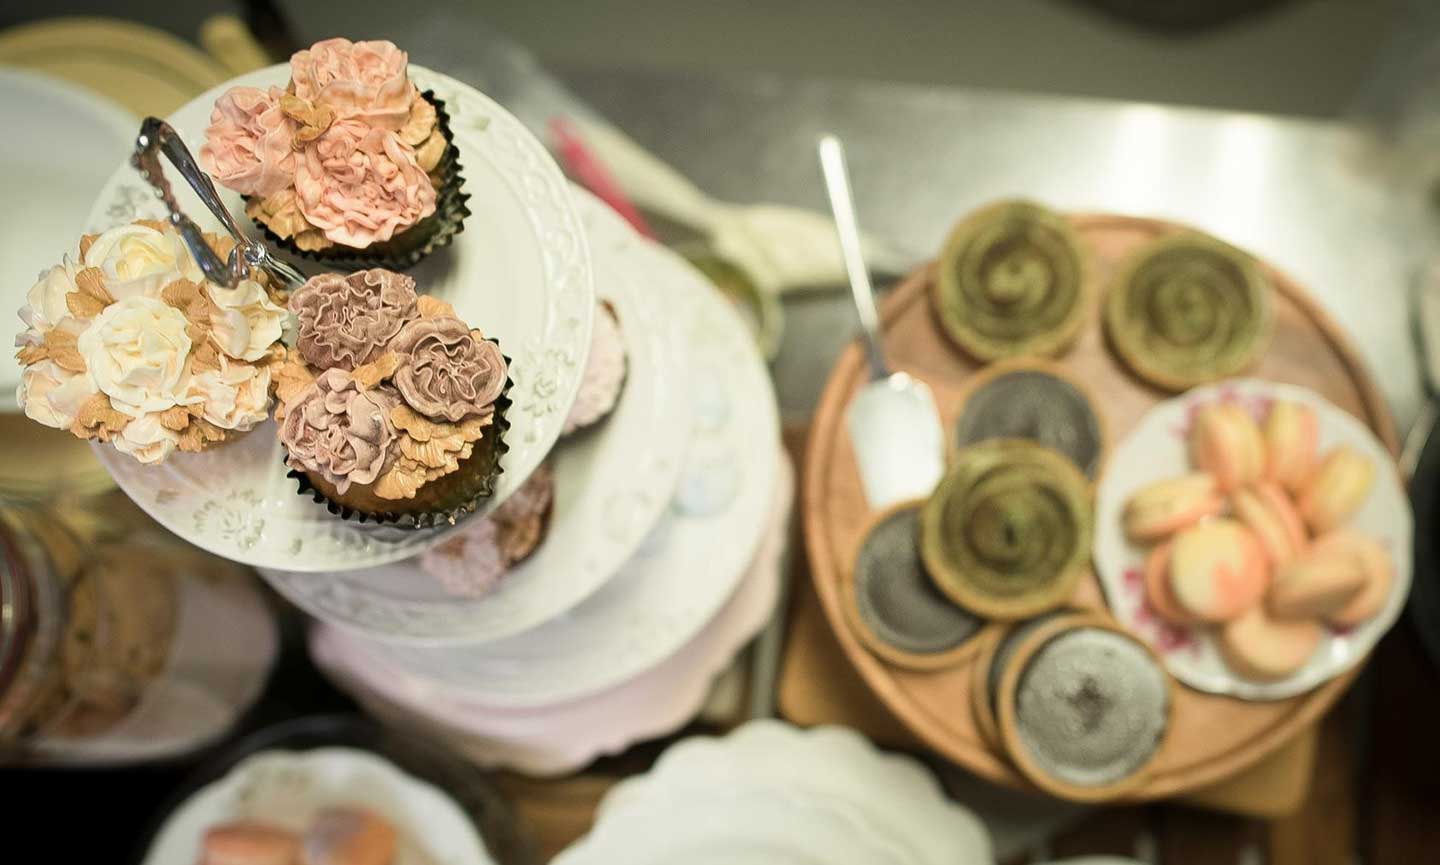 Plates of cupcakes